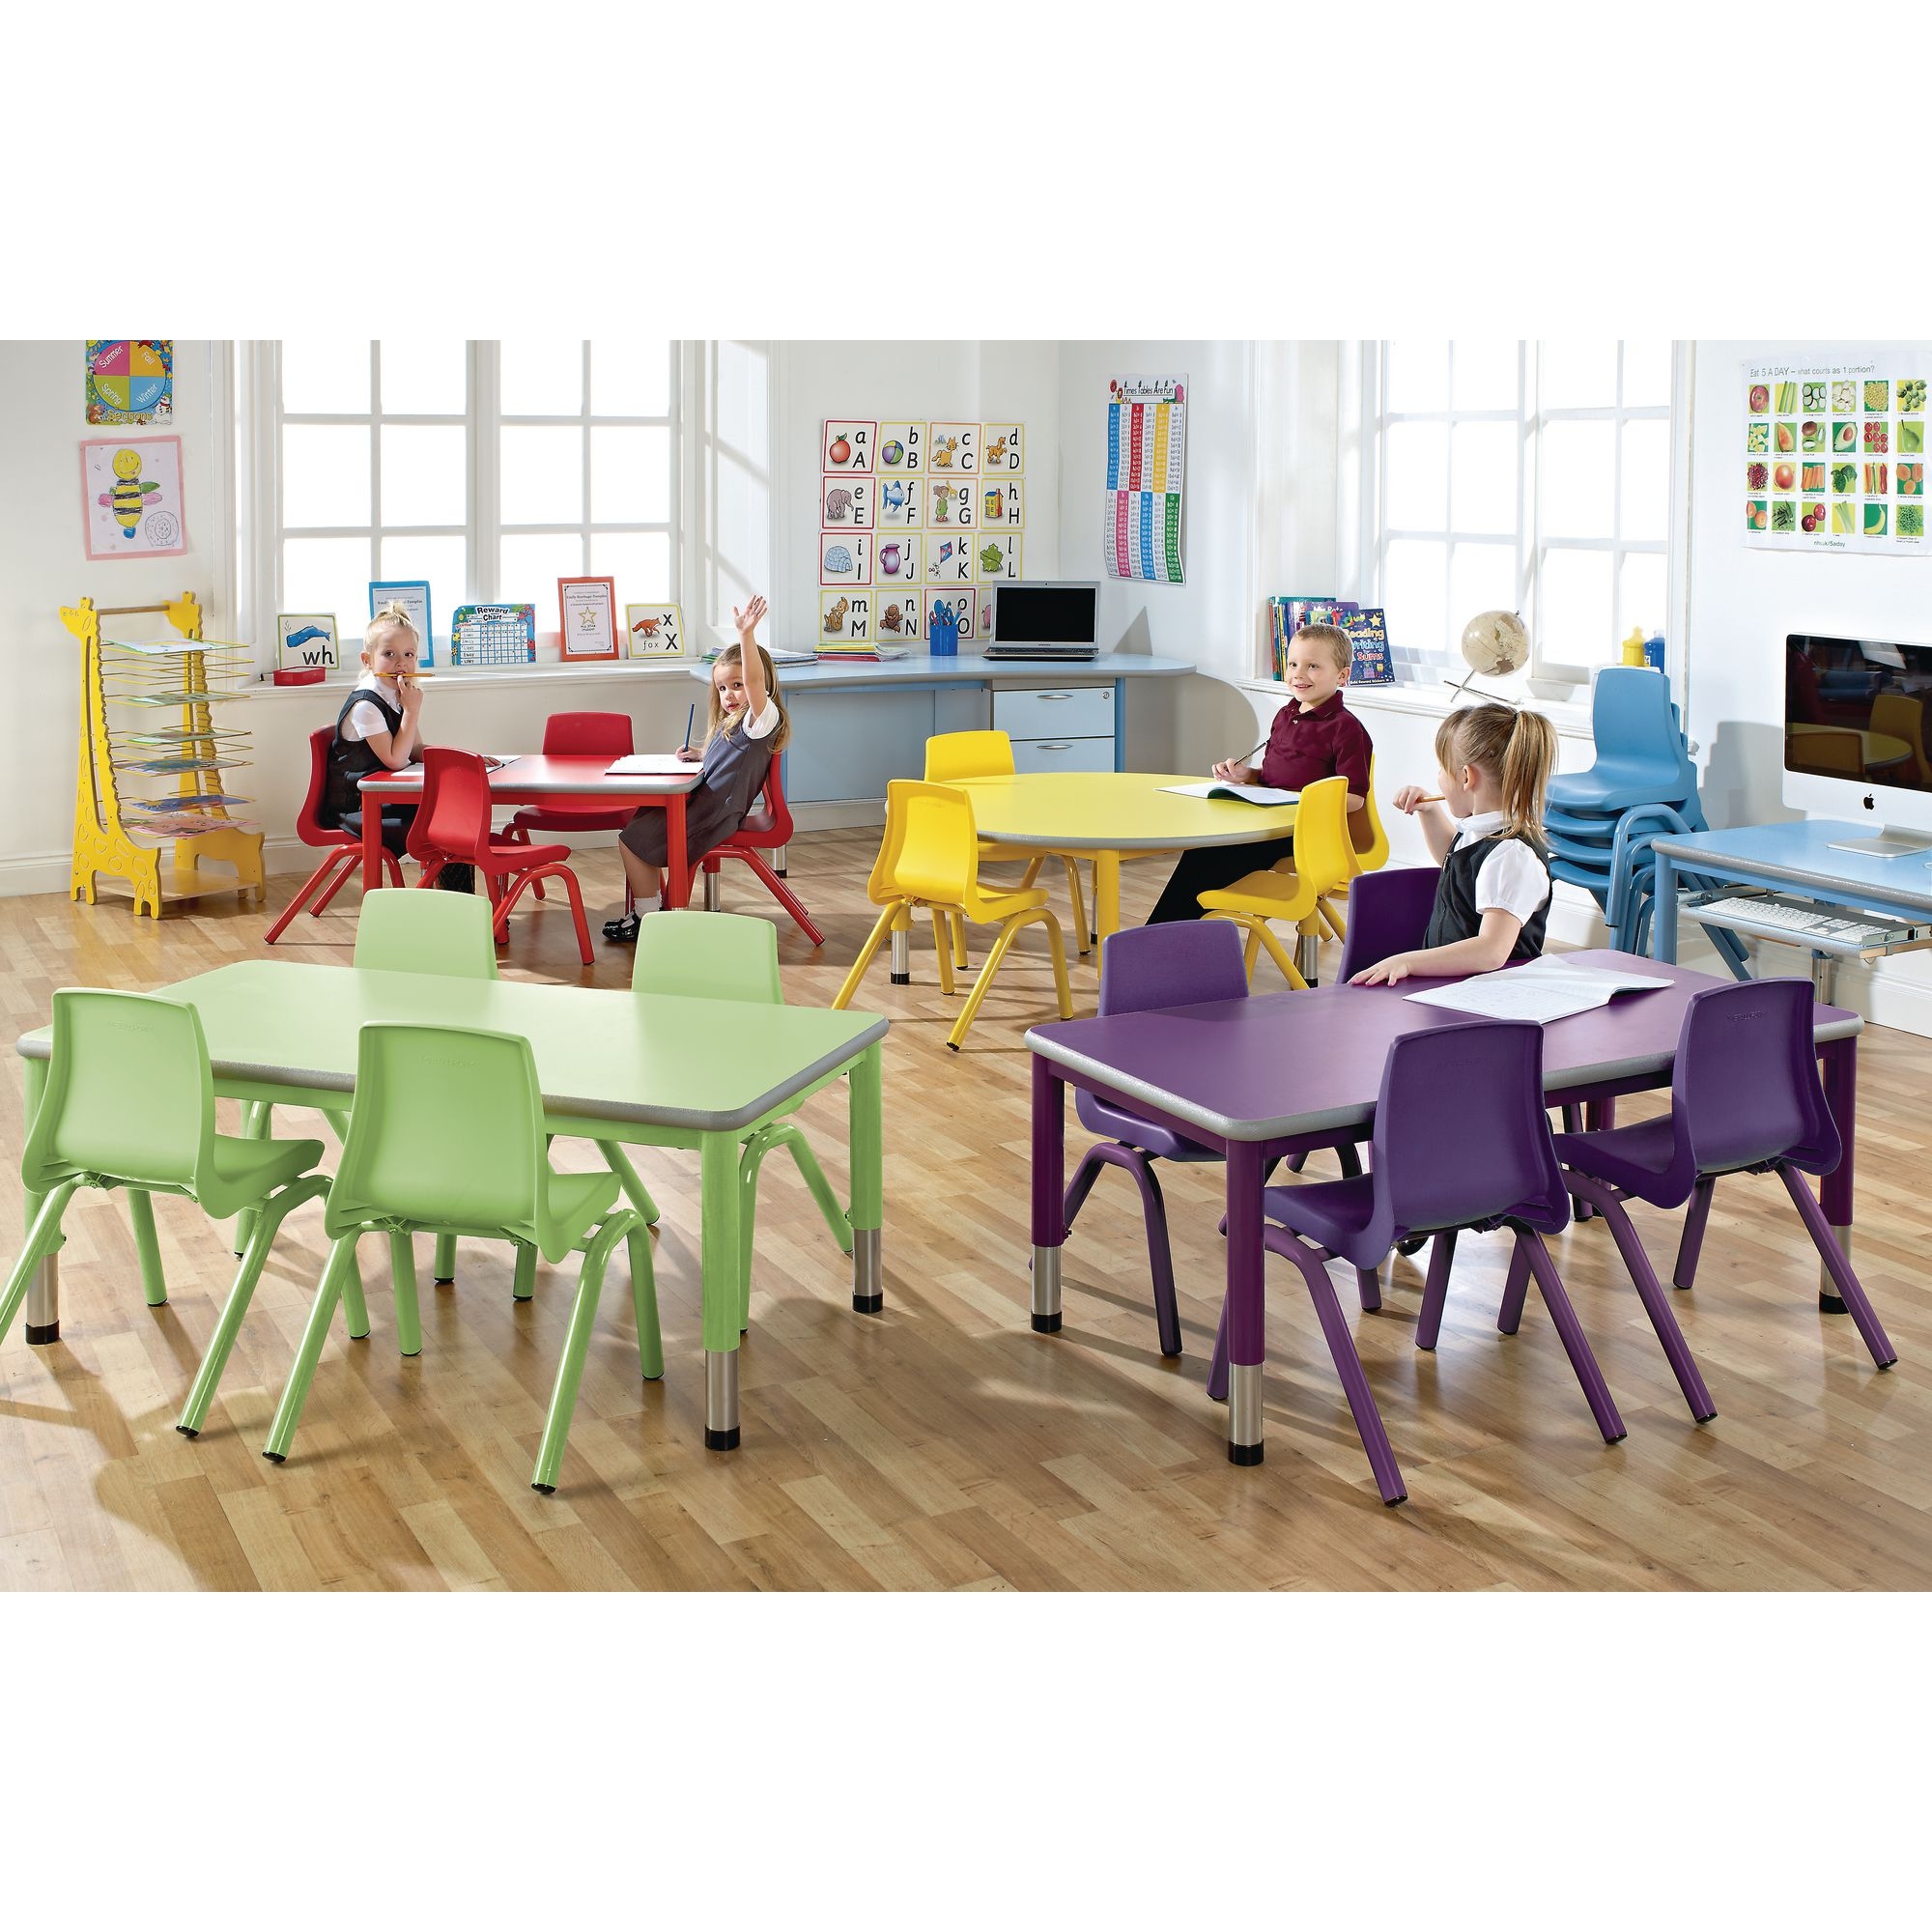 Harlequin Rectangular Height Adjustable Steel Classroom Pack: Table and 4 Chairs - 900 x 600 x 400mm - Soft Blue